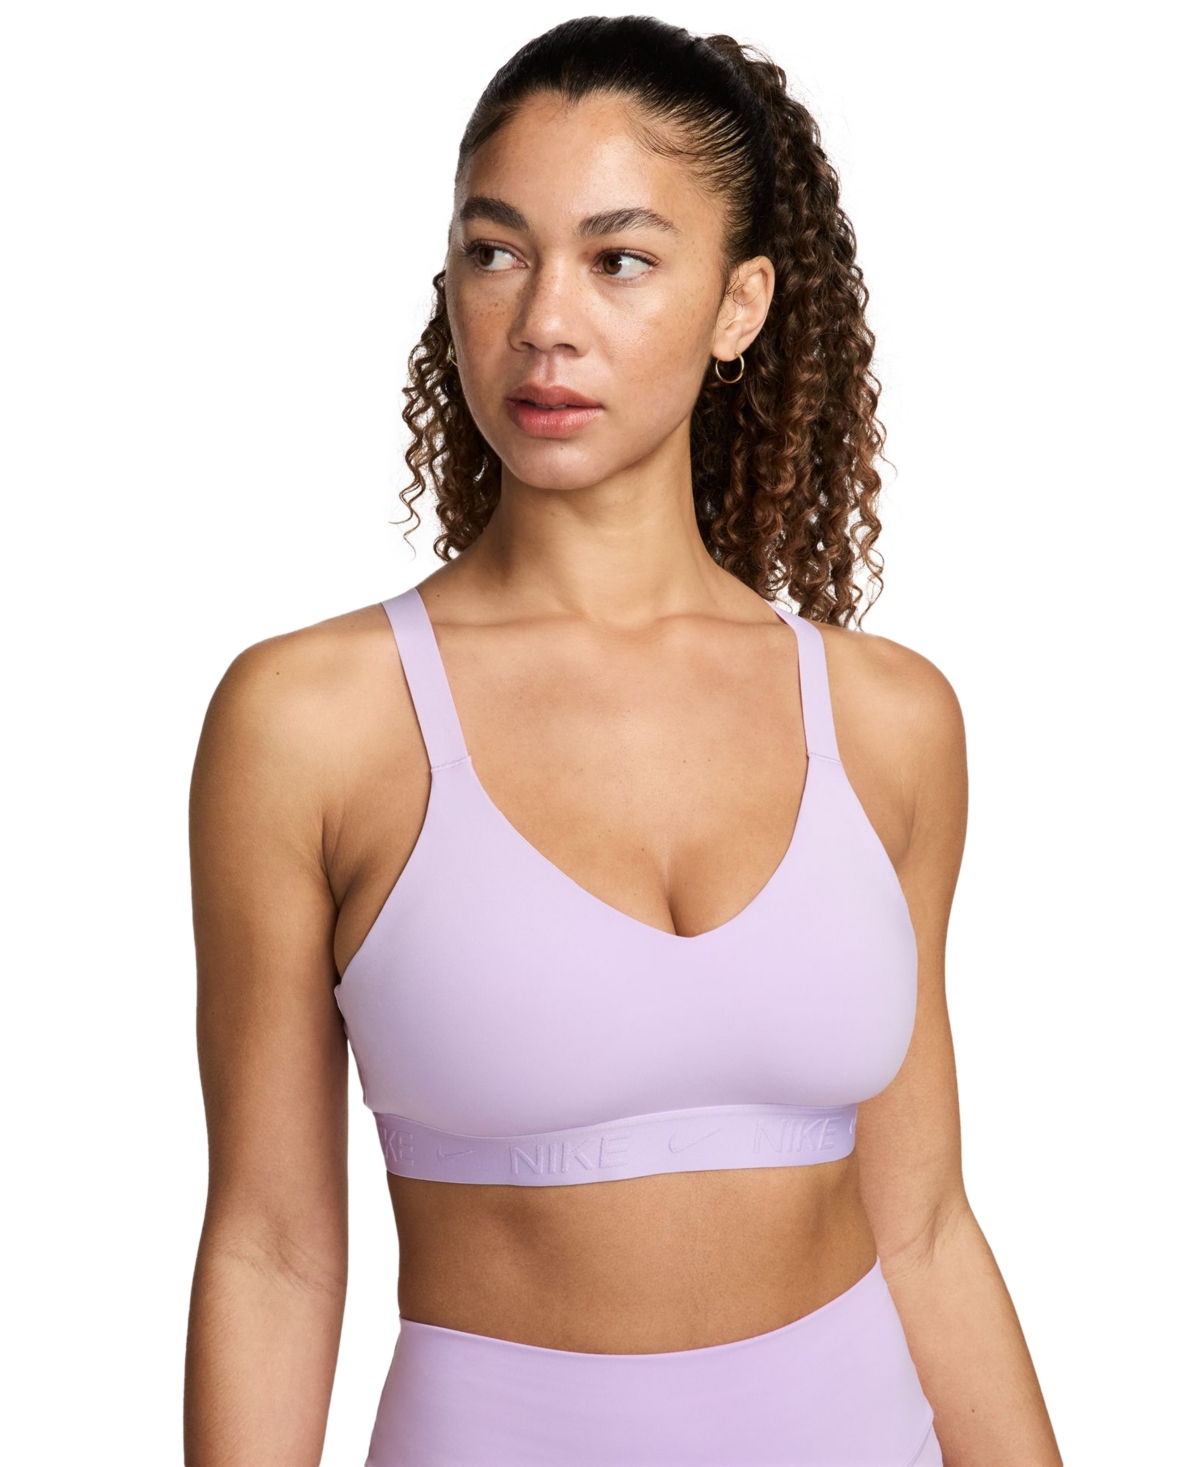 Nike Women's Indy Medium-support Padded Adjustable Sports Bra In Lilac Bloom,lilac Bloom